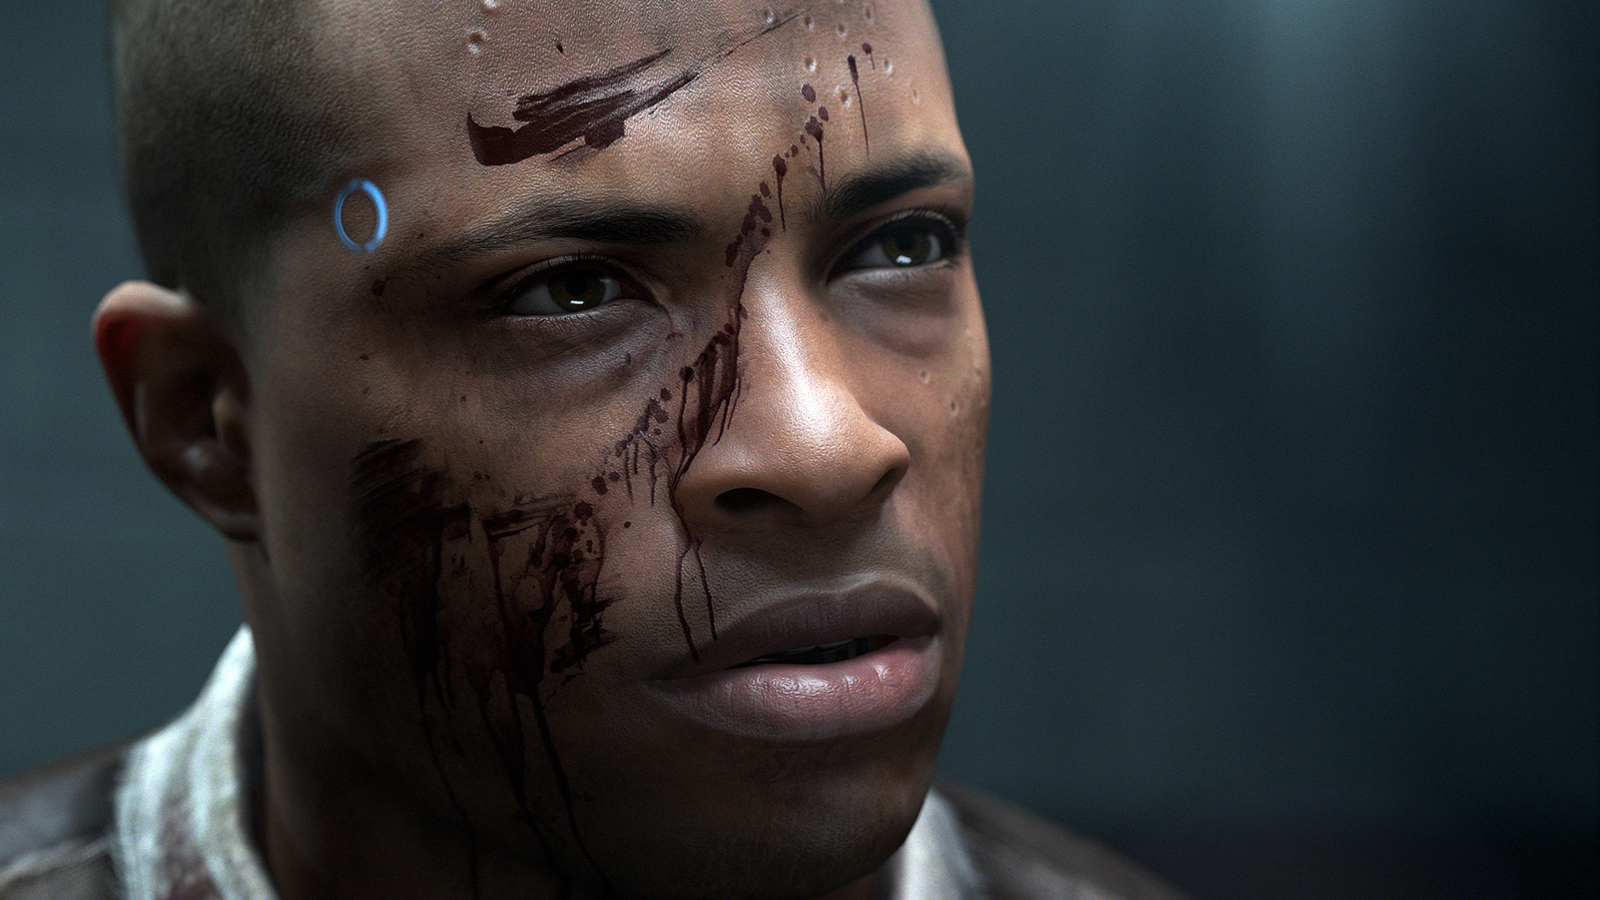 Detroit Become Human 2: Rumored Sequel or Spin-off in Development — Eightify